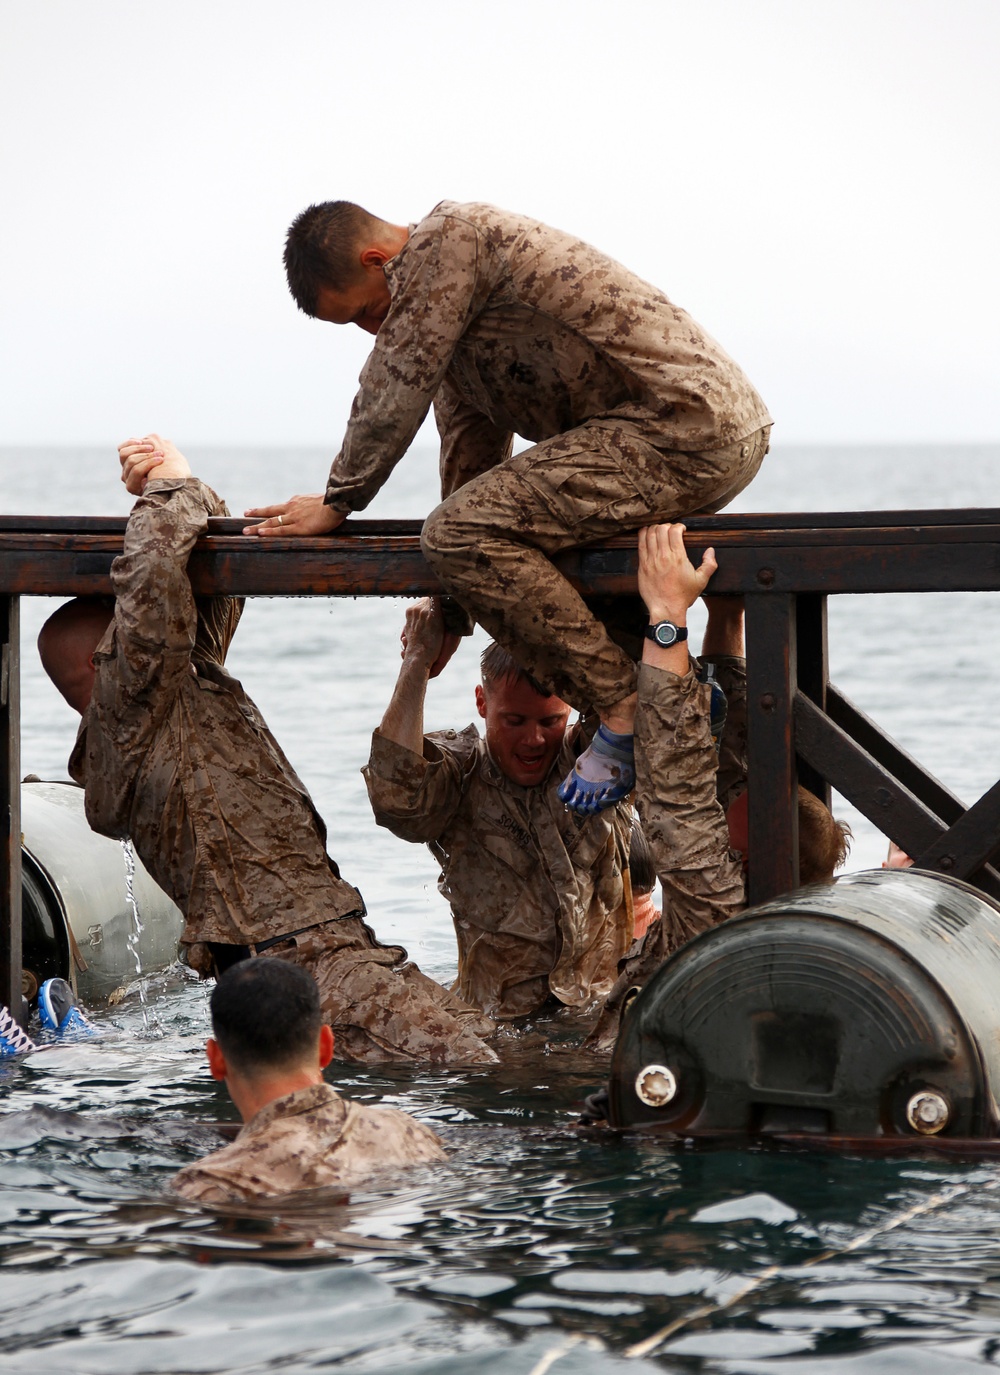 24 MEU Deployment 2012: Water obstacle course in Djibouti